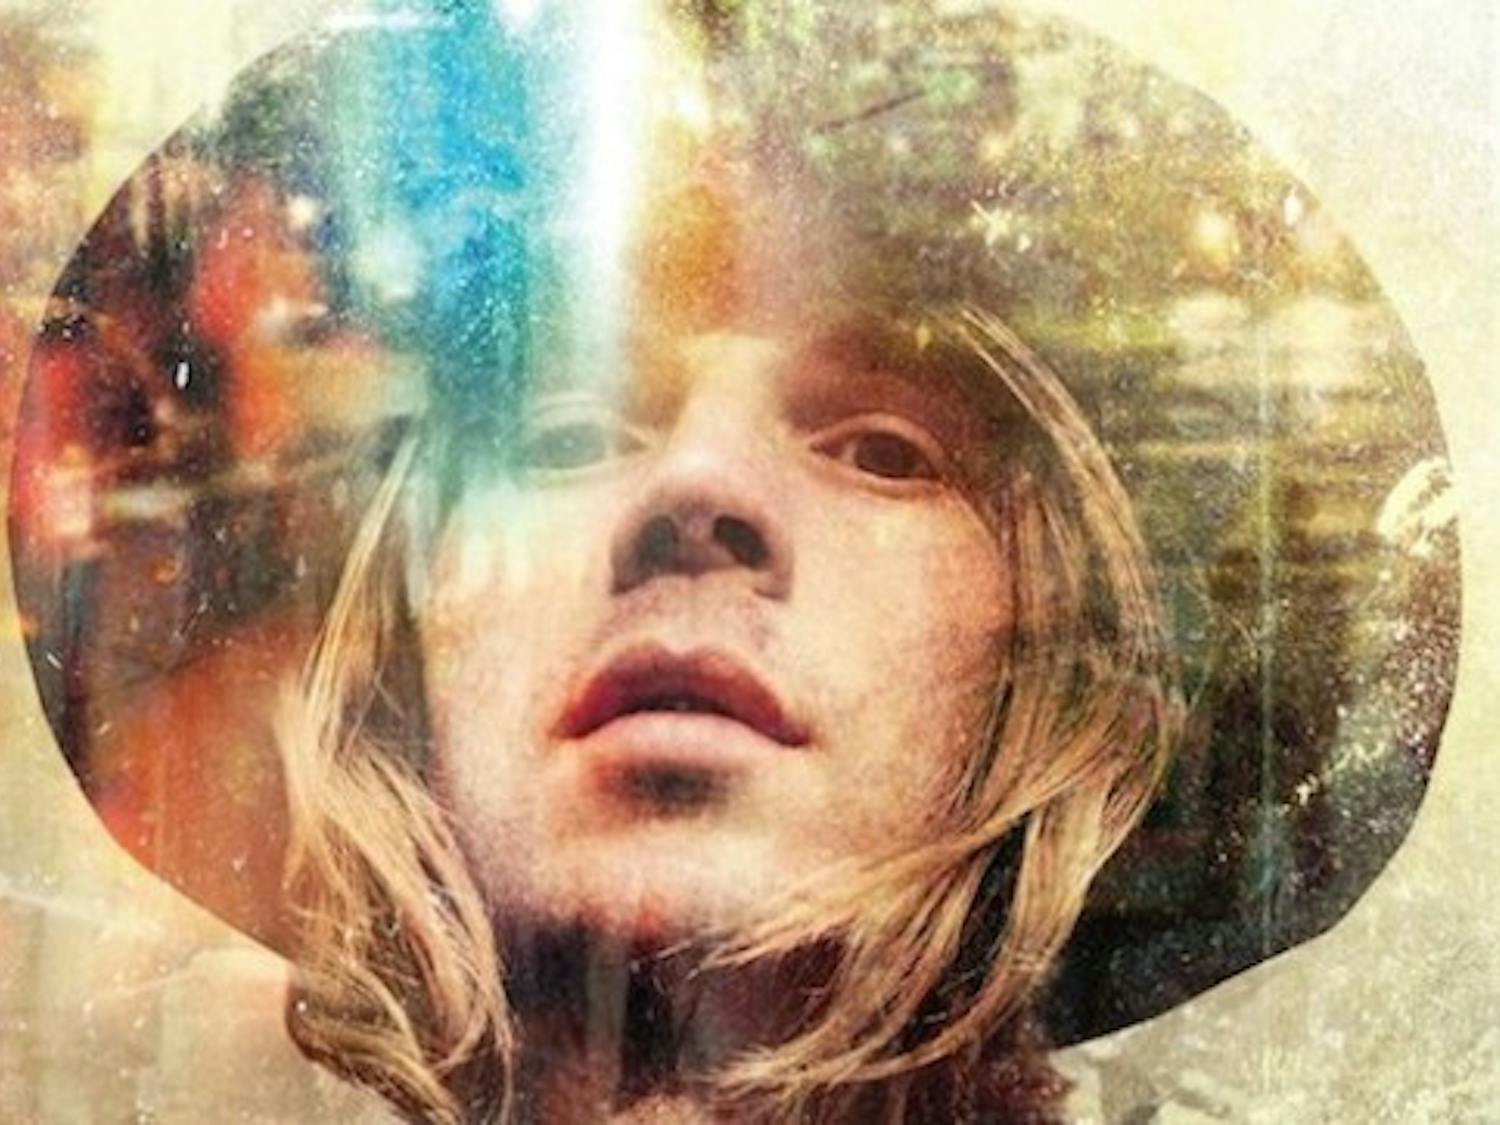 beck-morning-phase-cover-642x362-2